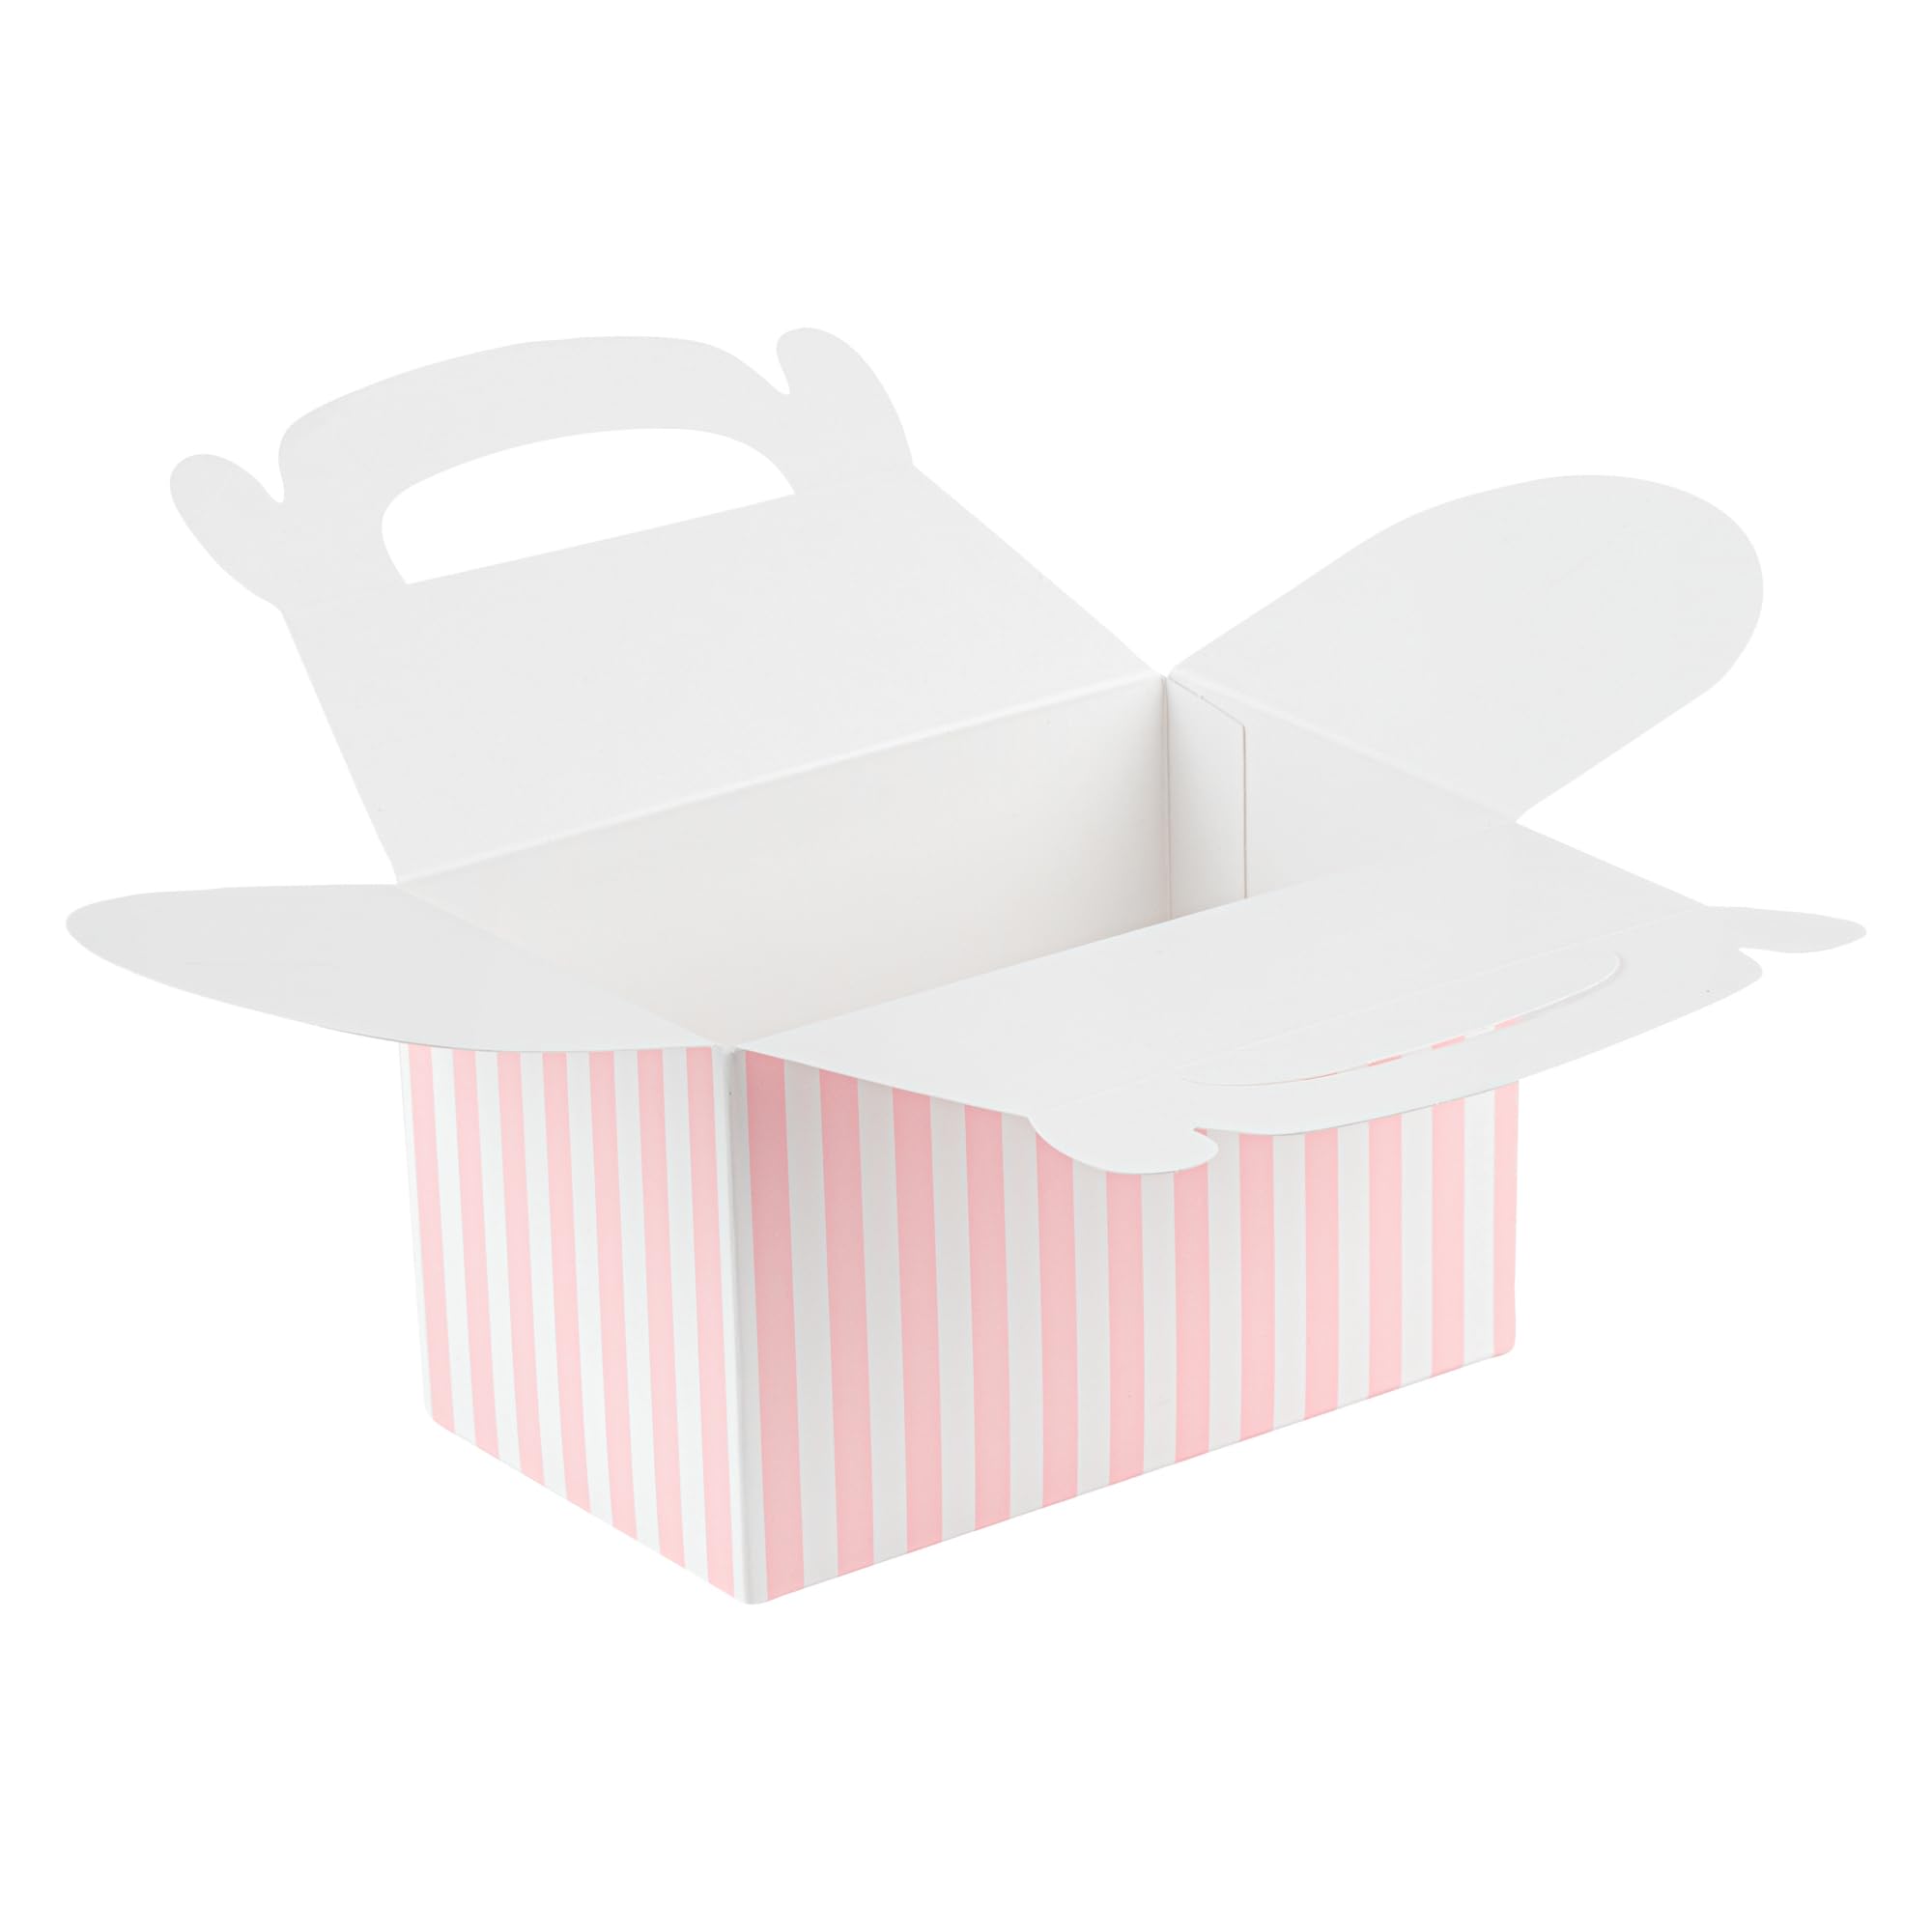 Bio Tek 6 x 3.5 x 3.5 Inch Gable Boxes For Party Favors, 25 Durable Gift Treat Boxes - Striped Design, With Built-In Handle, Pink And White Paper Barn Boxes, Disposable, For Parties - Restaurantware